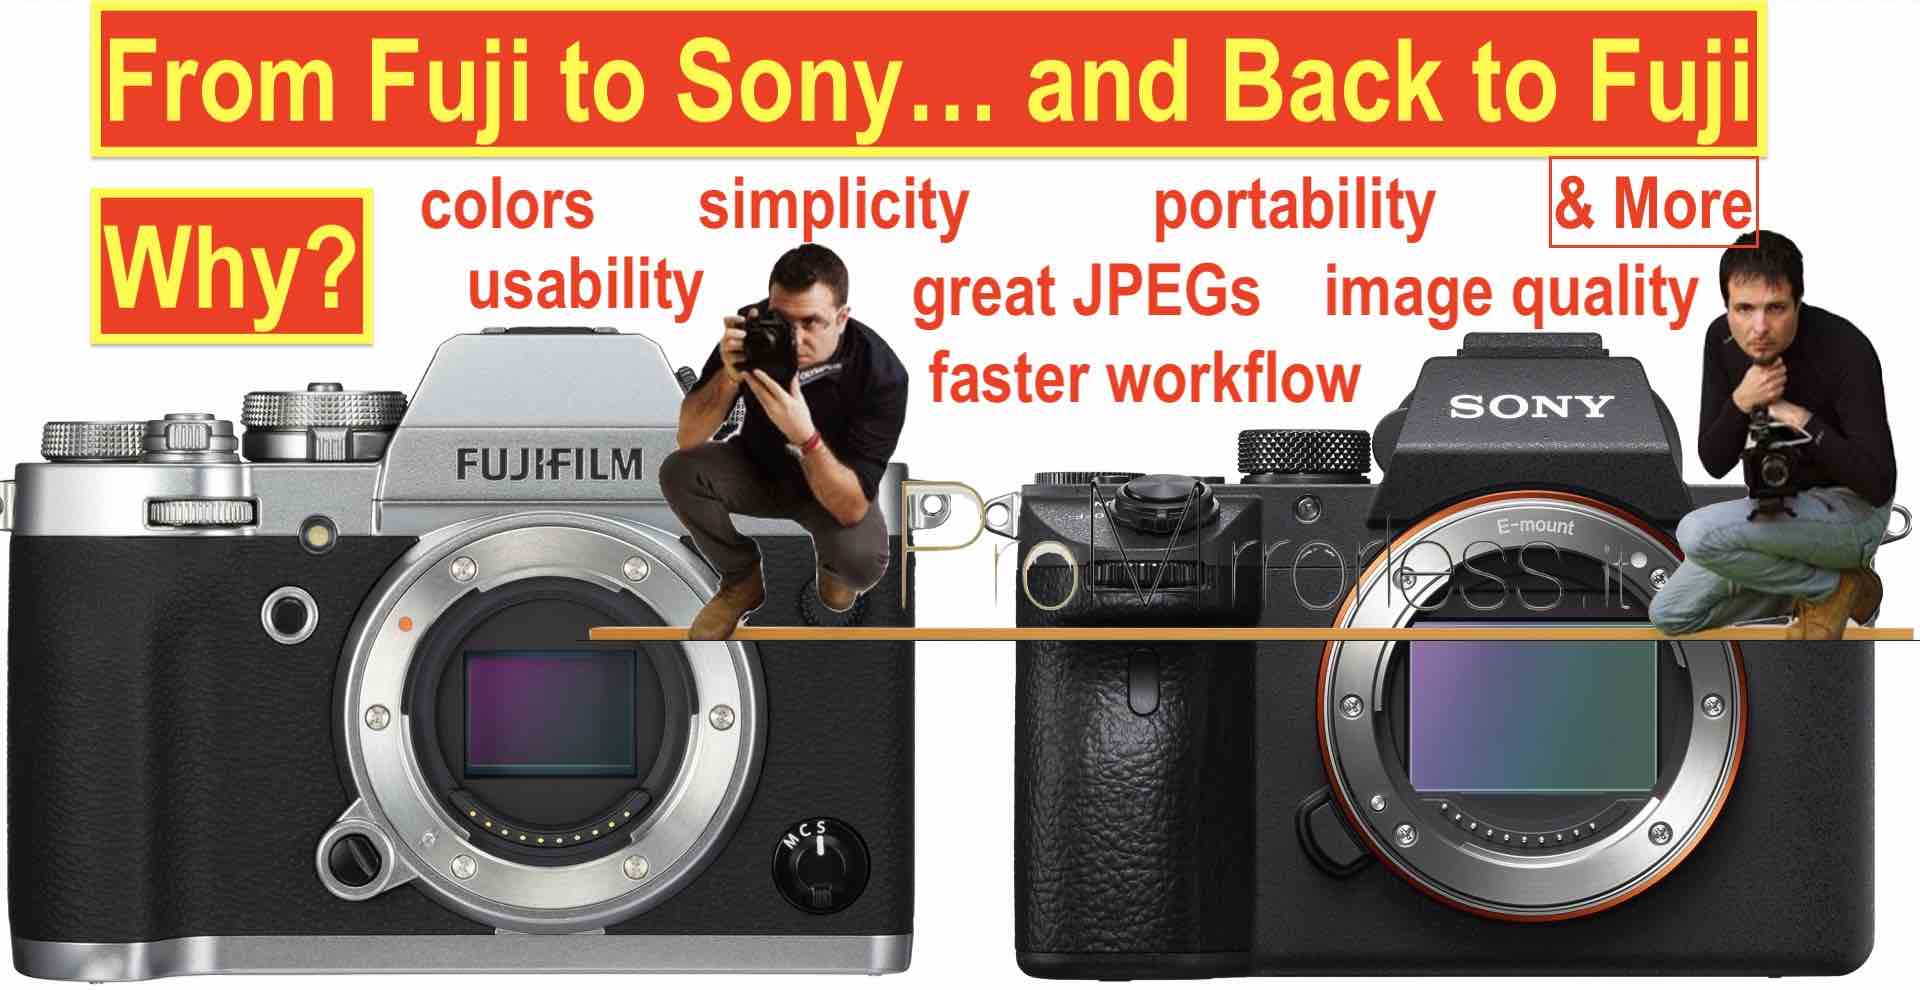 This Guy Fujifilm for Sony A7III and then Switched Back to Fujifilm X - Read Why Here Fuji